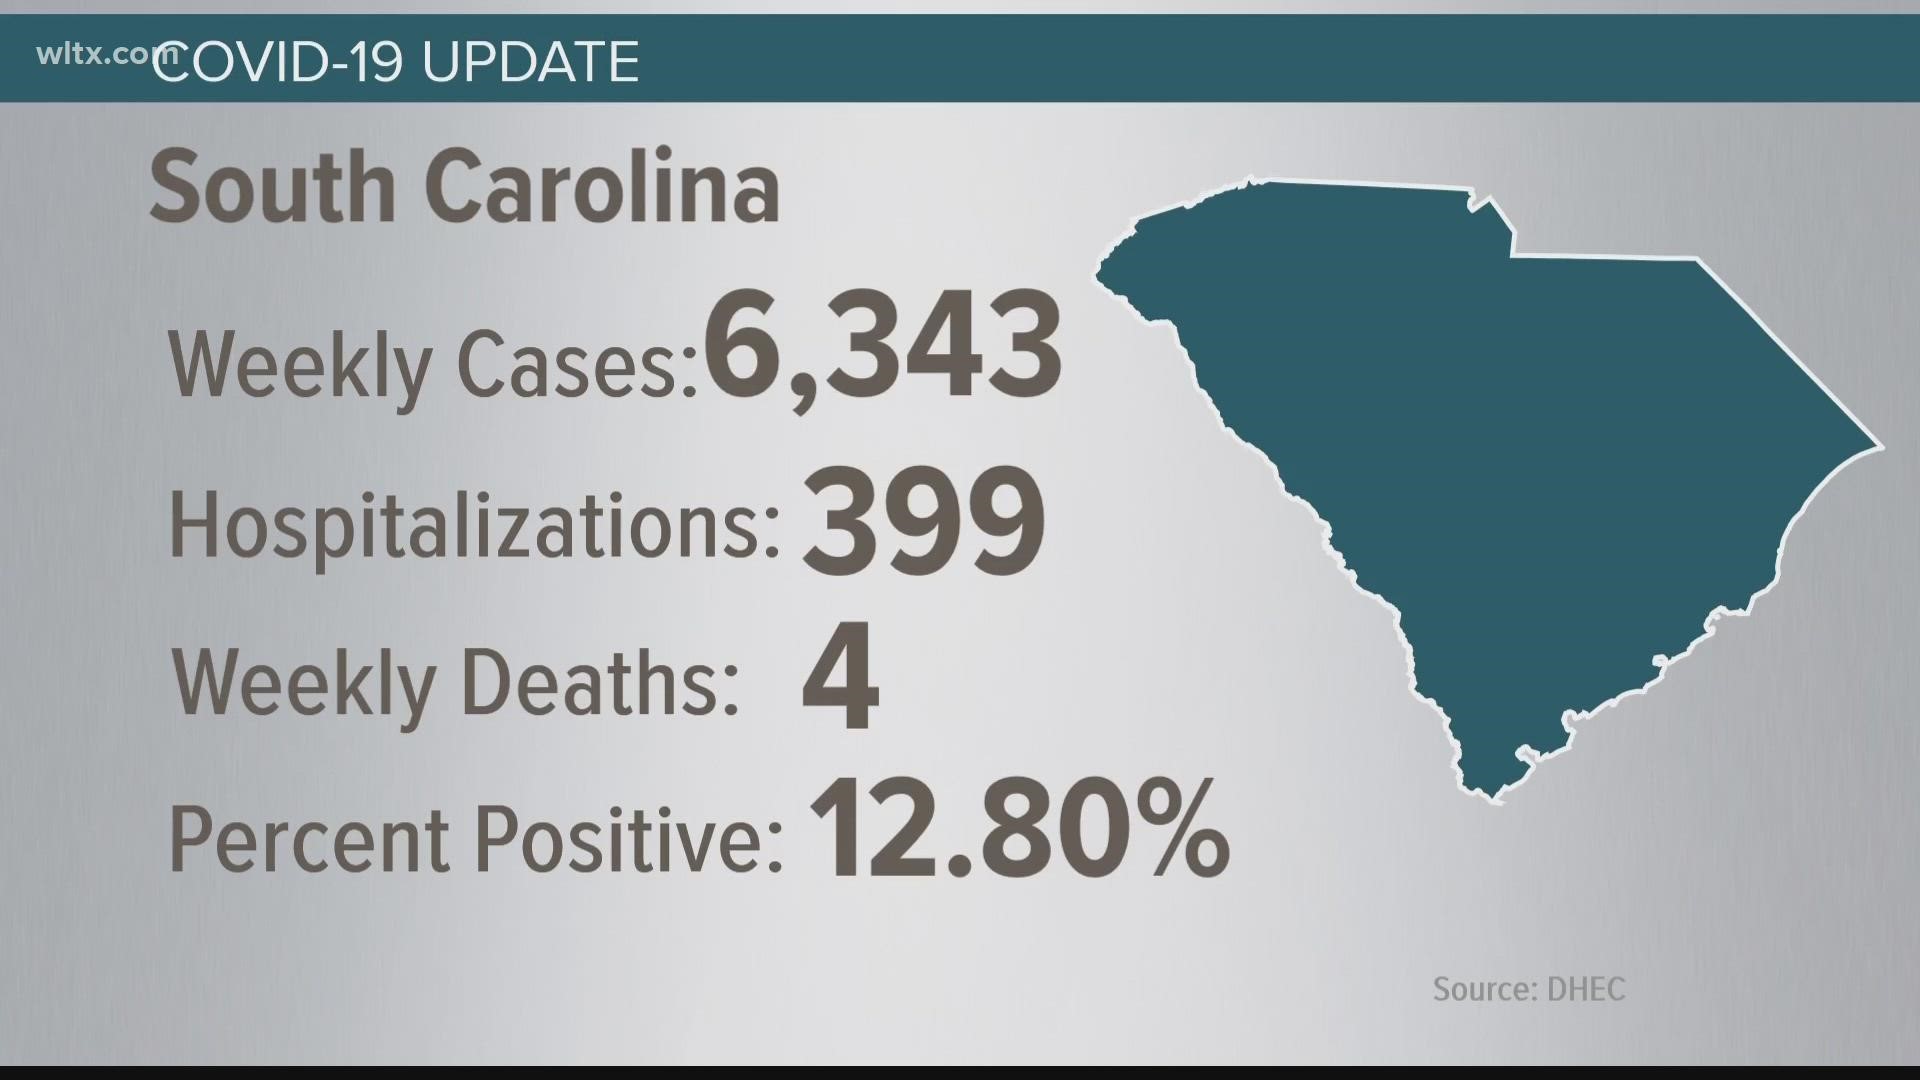 New data from DHEC shows that there were 6, 343 new cases during the week ending on September 17.